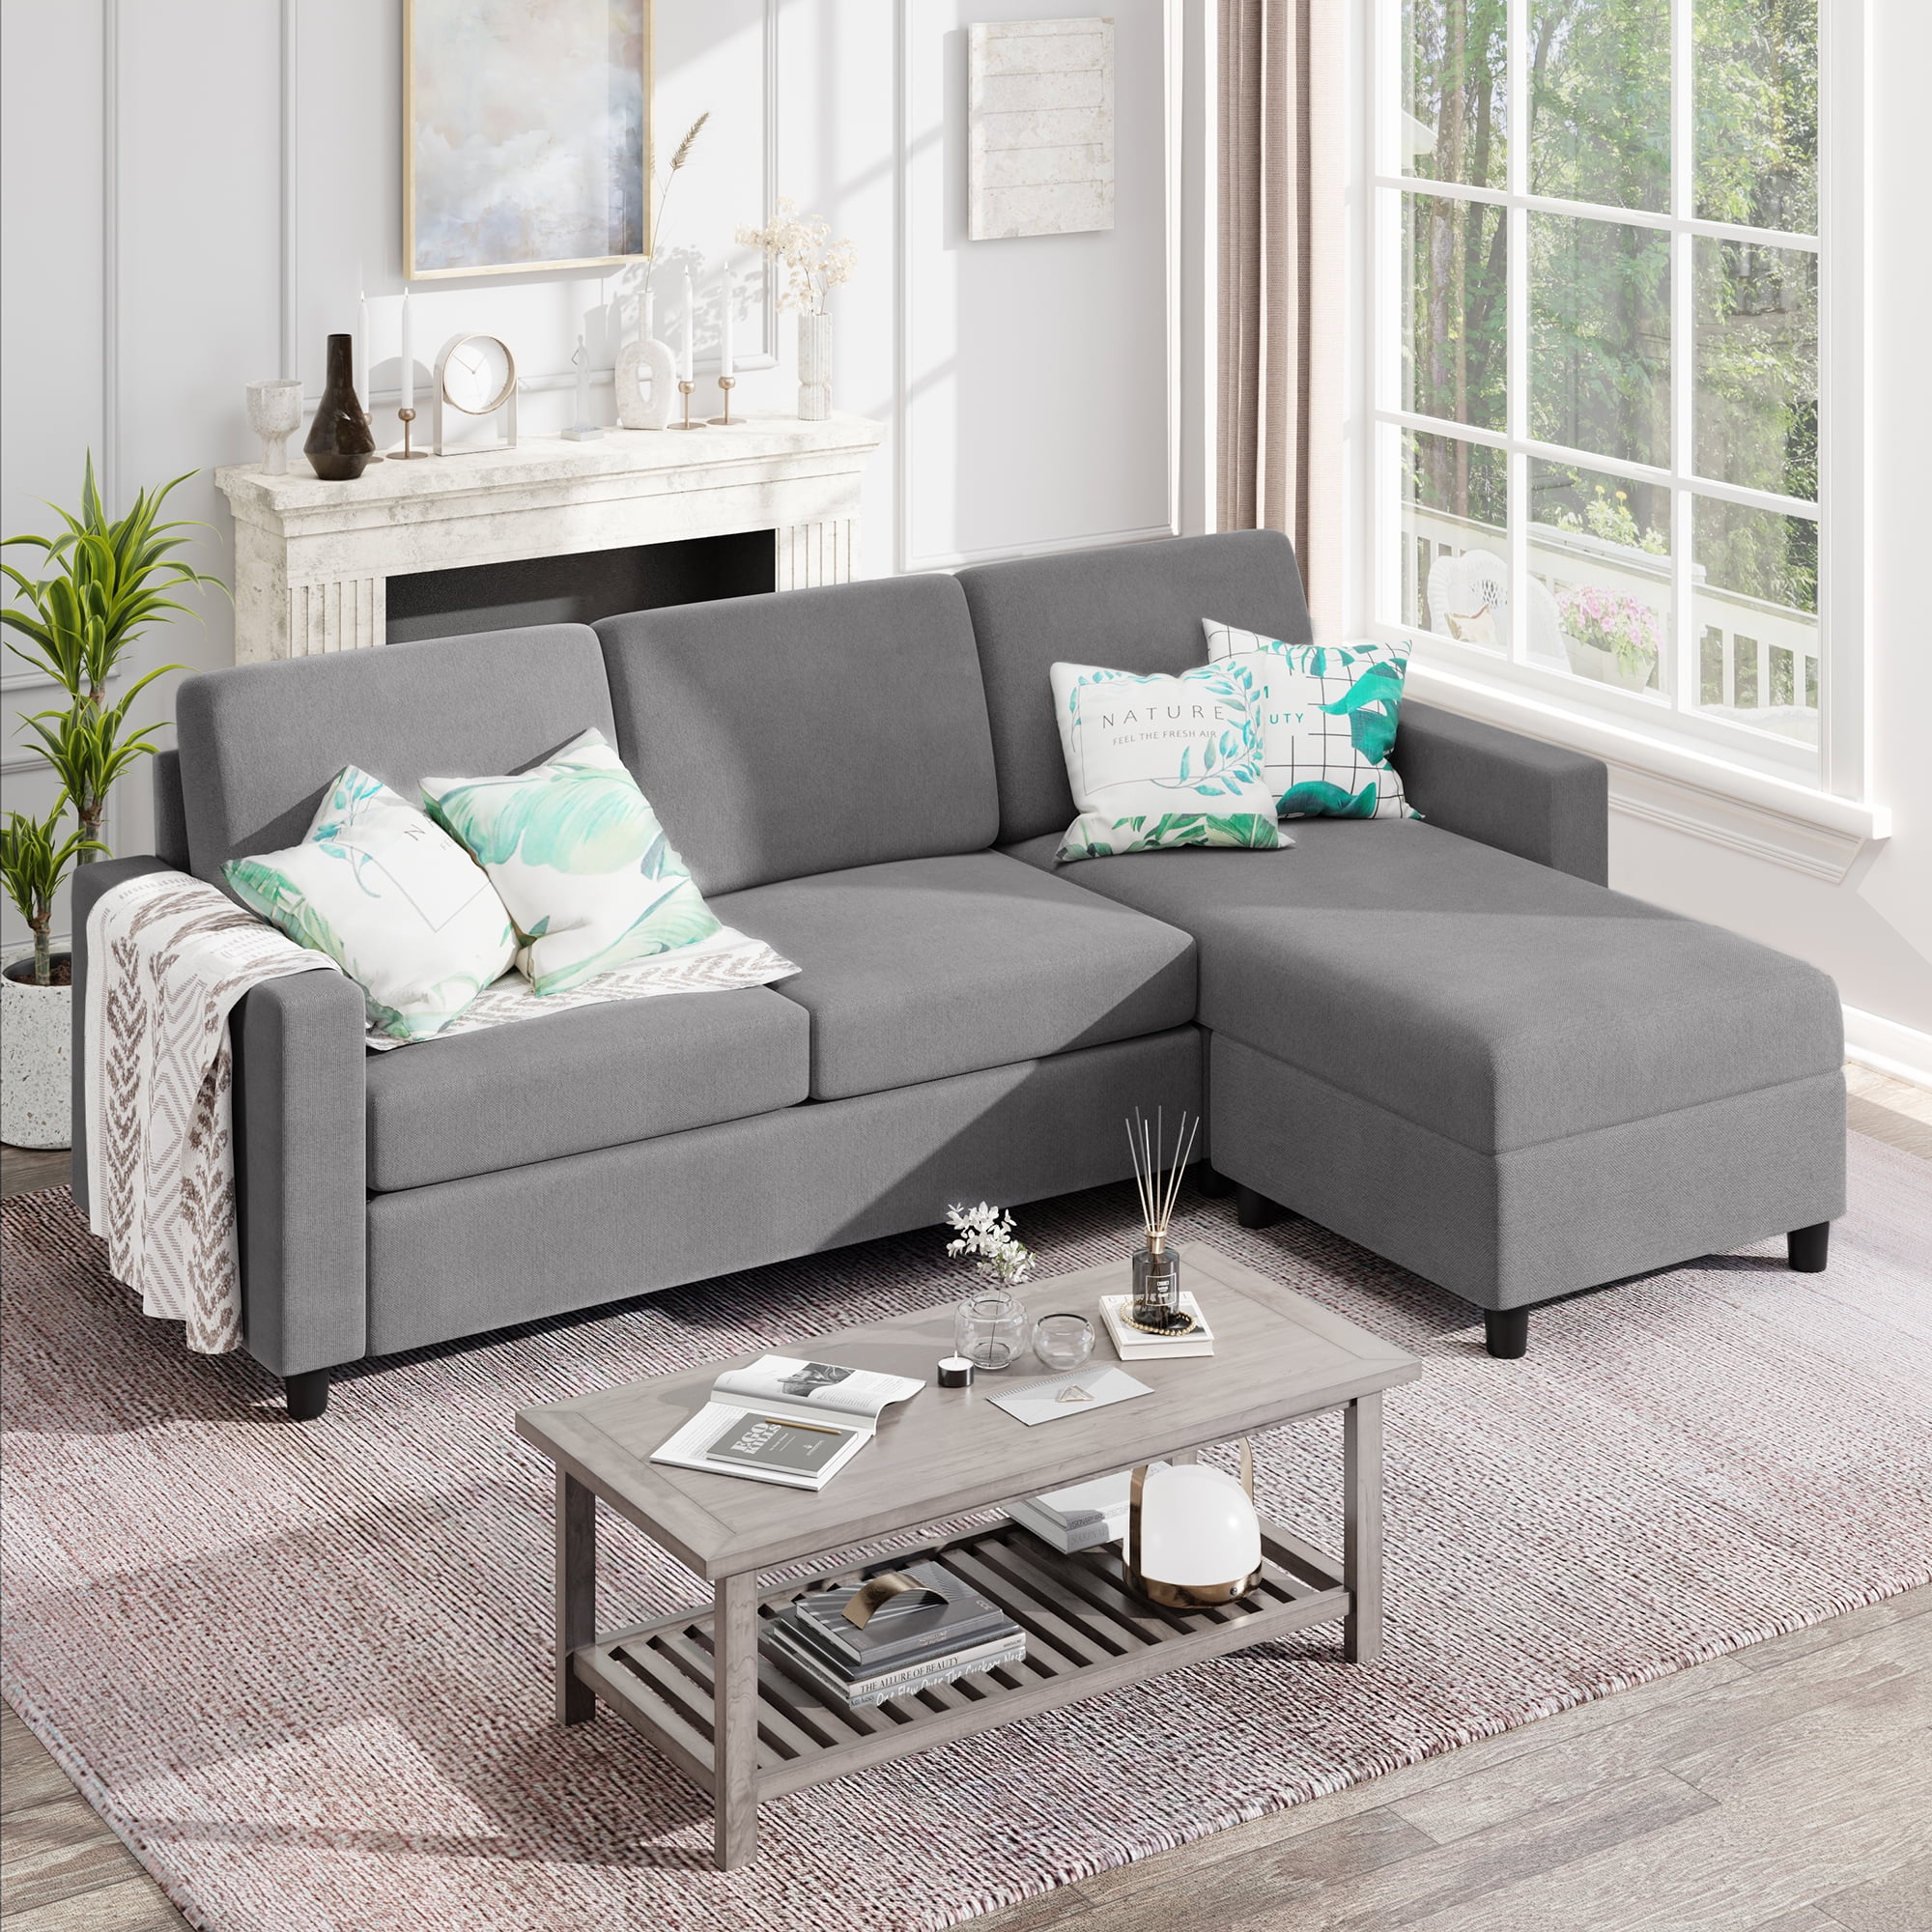 Sobaniilo Convertible Sectional Sofa Couch Modern Linen Fabric L Shaped 3 Seat With Reversible Chaise For Small E Dark Gray Com